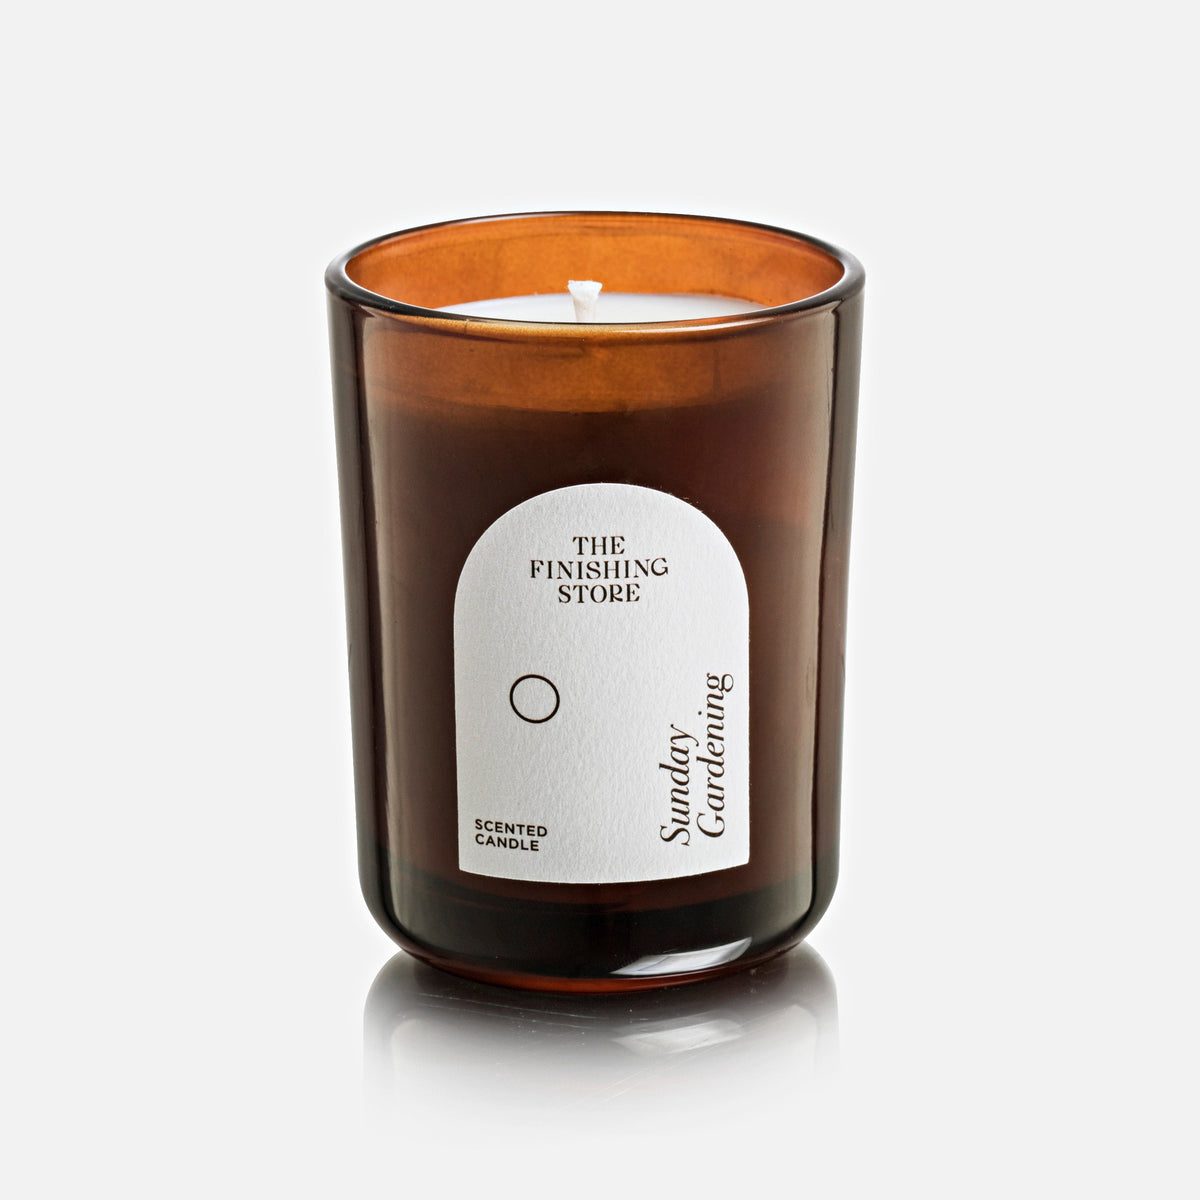 Sunday Gardening Scented Candle - The Finishing Store South Africa